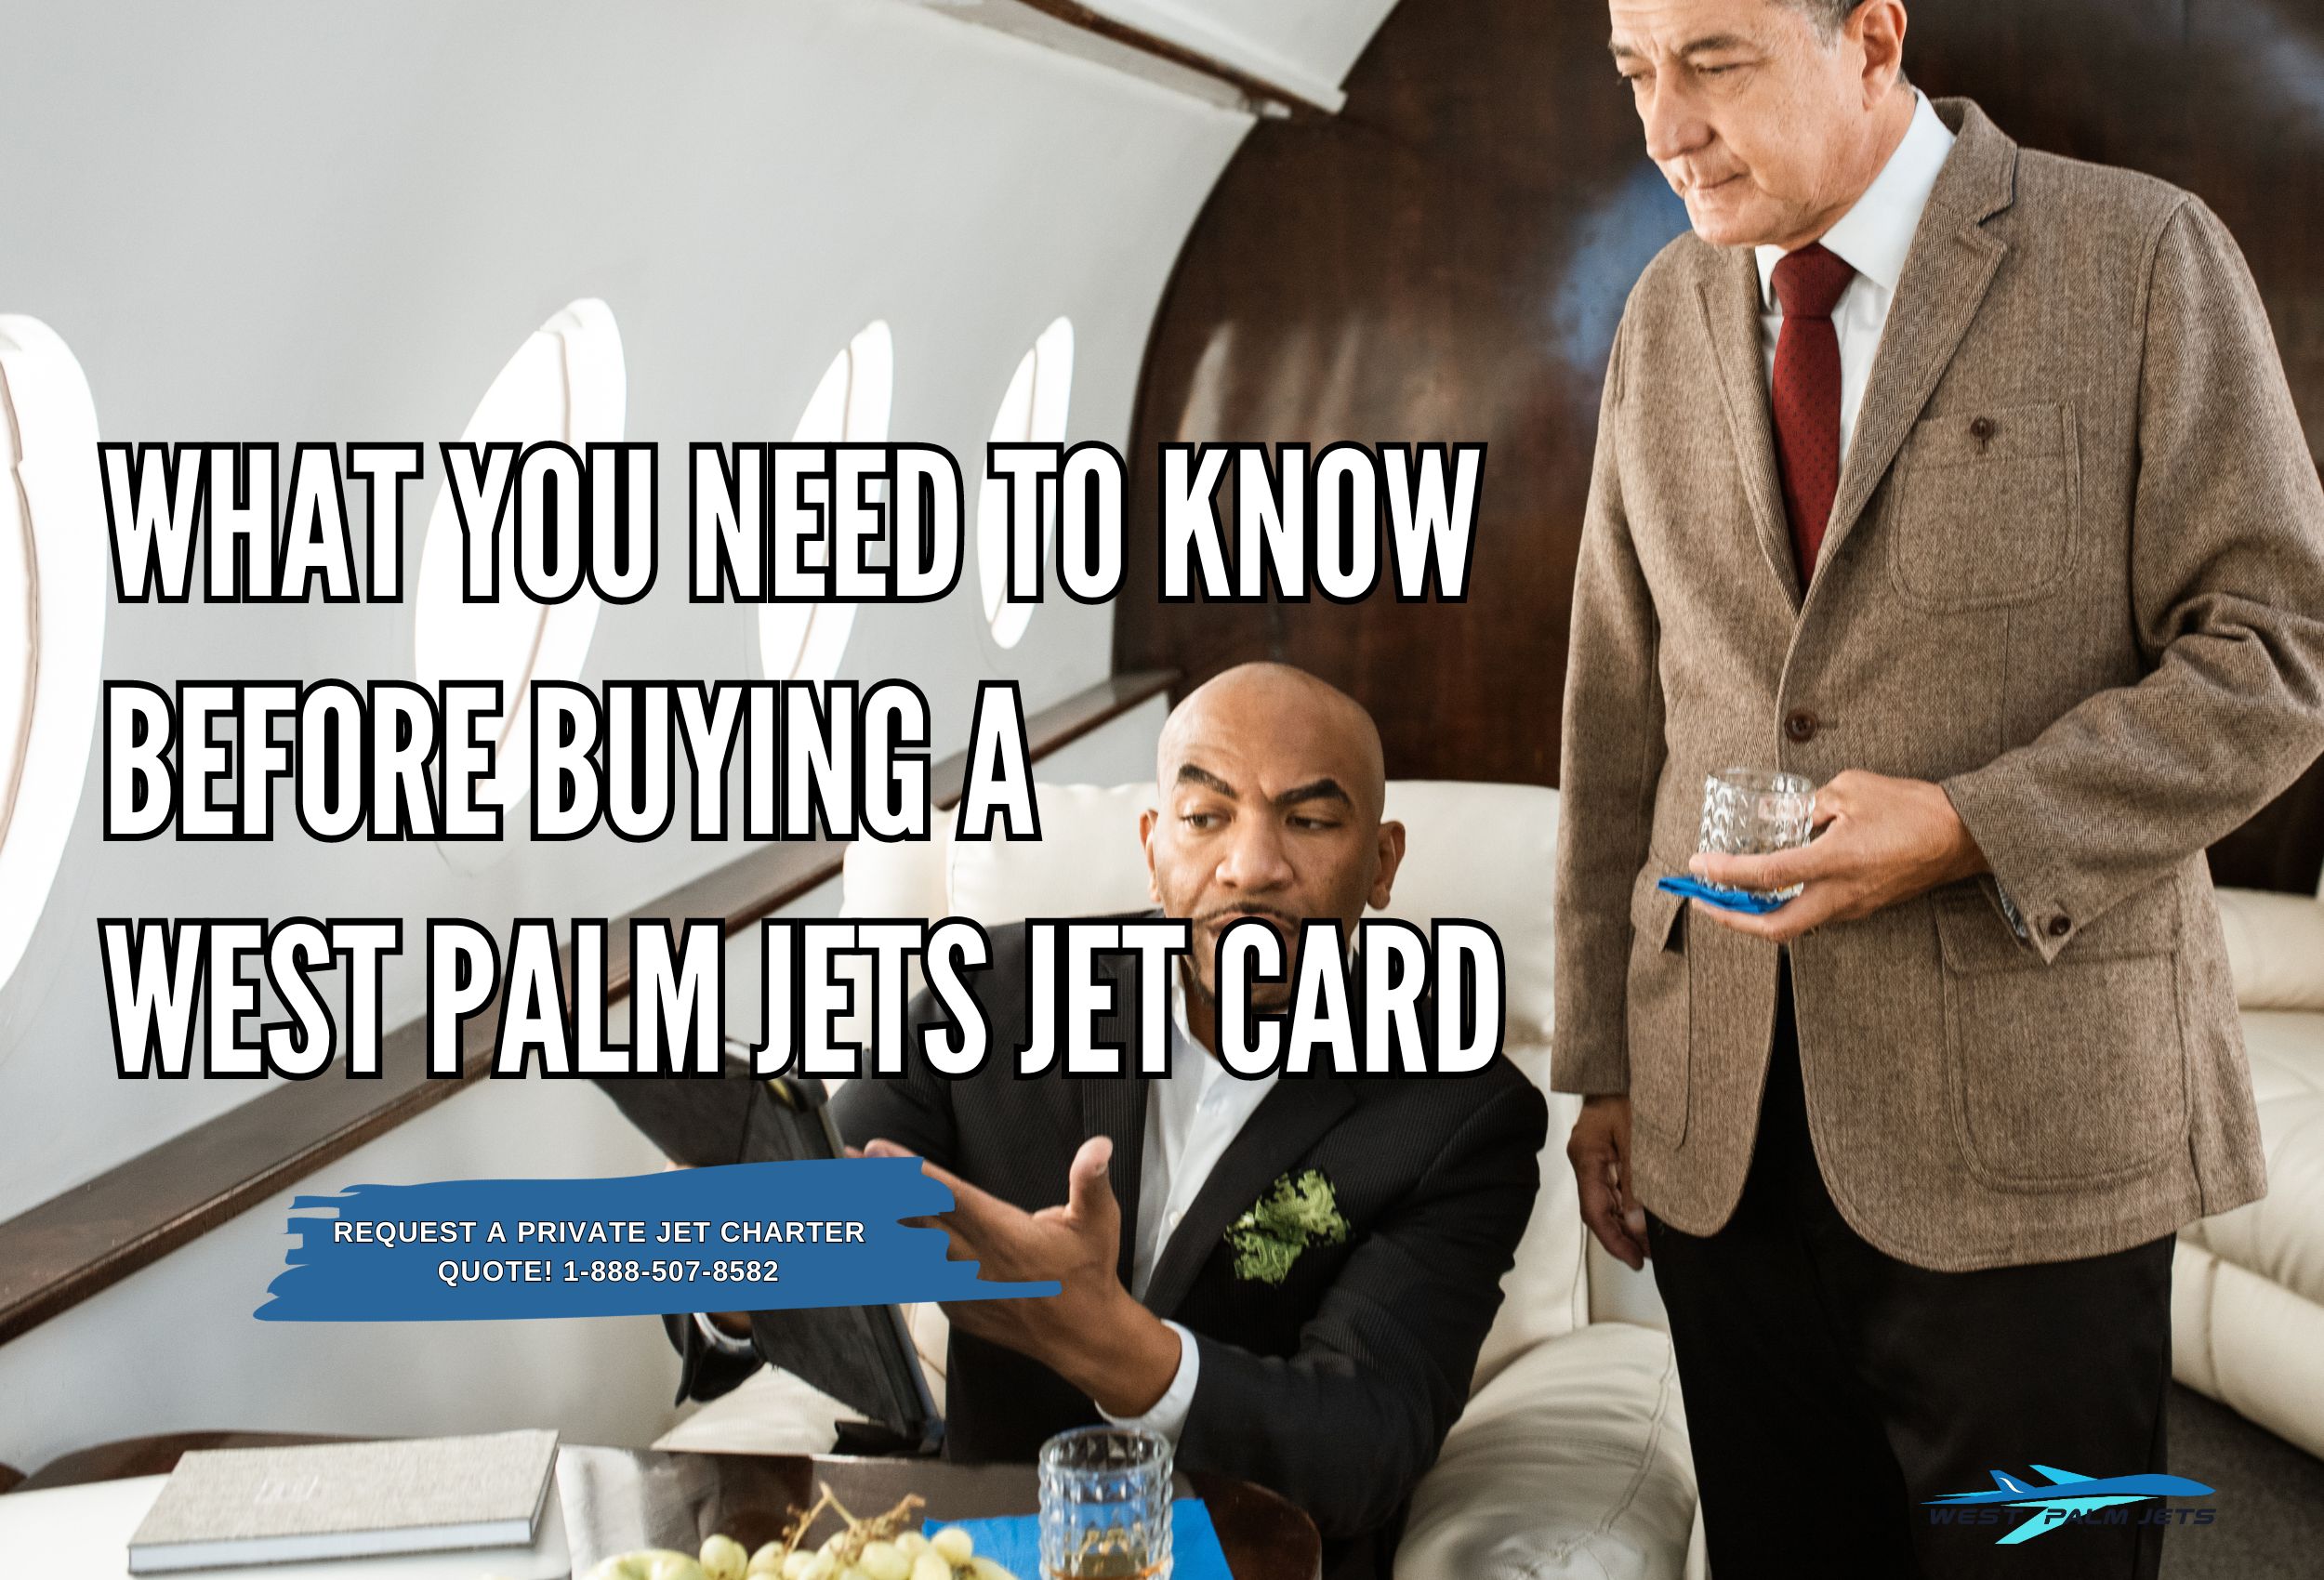 What You Need to Know Before Buying a West Palm Jets Jet Card